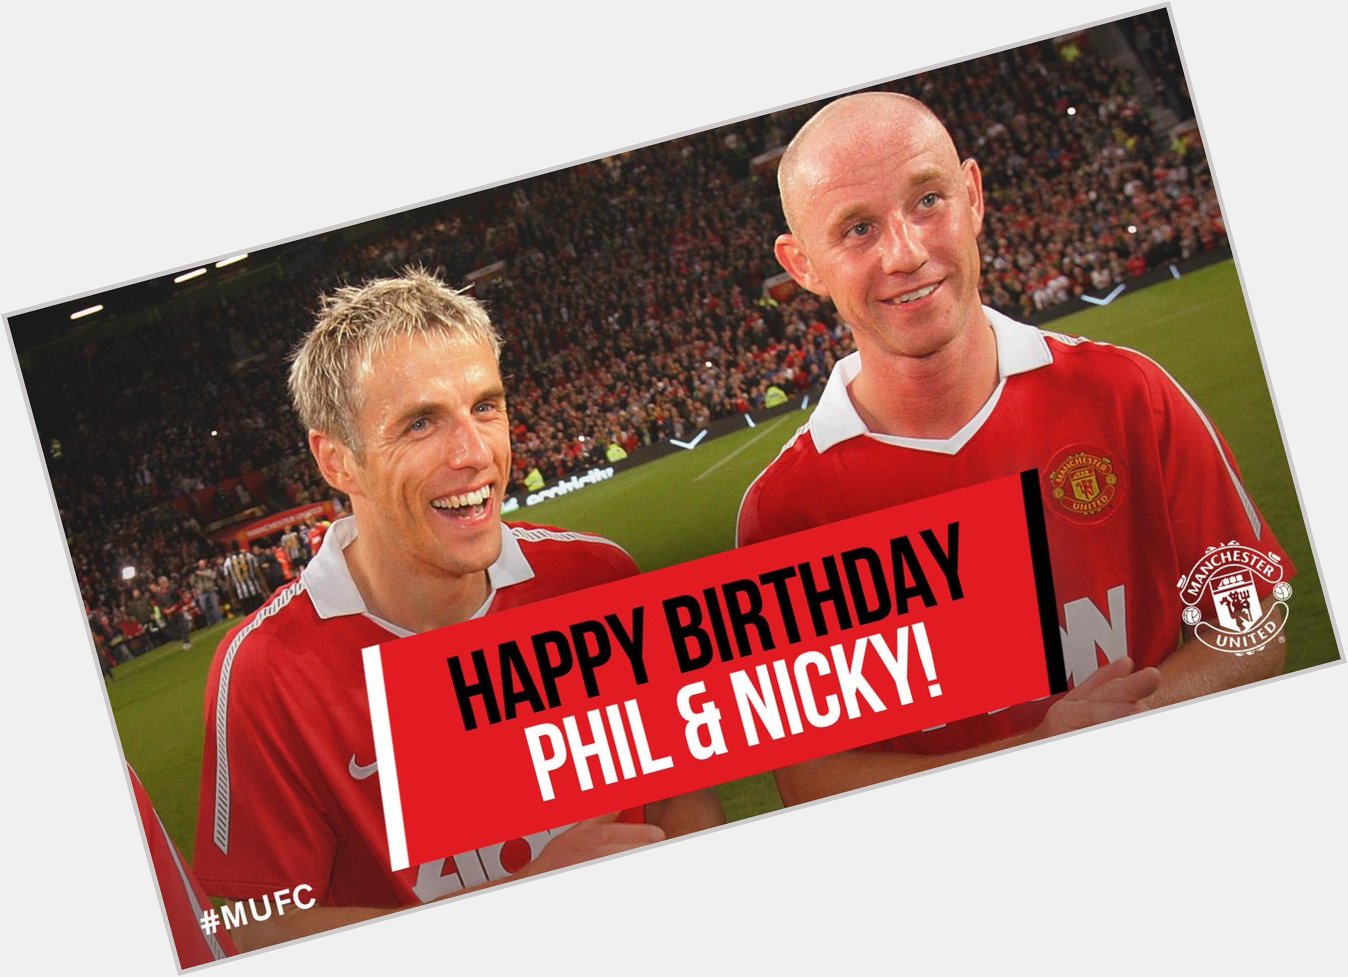 Happy birthday to Phil Neville and Nicky Butt 